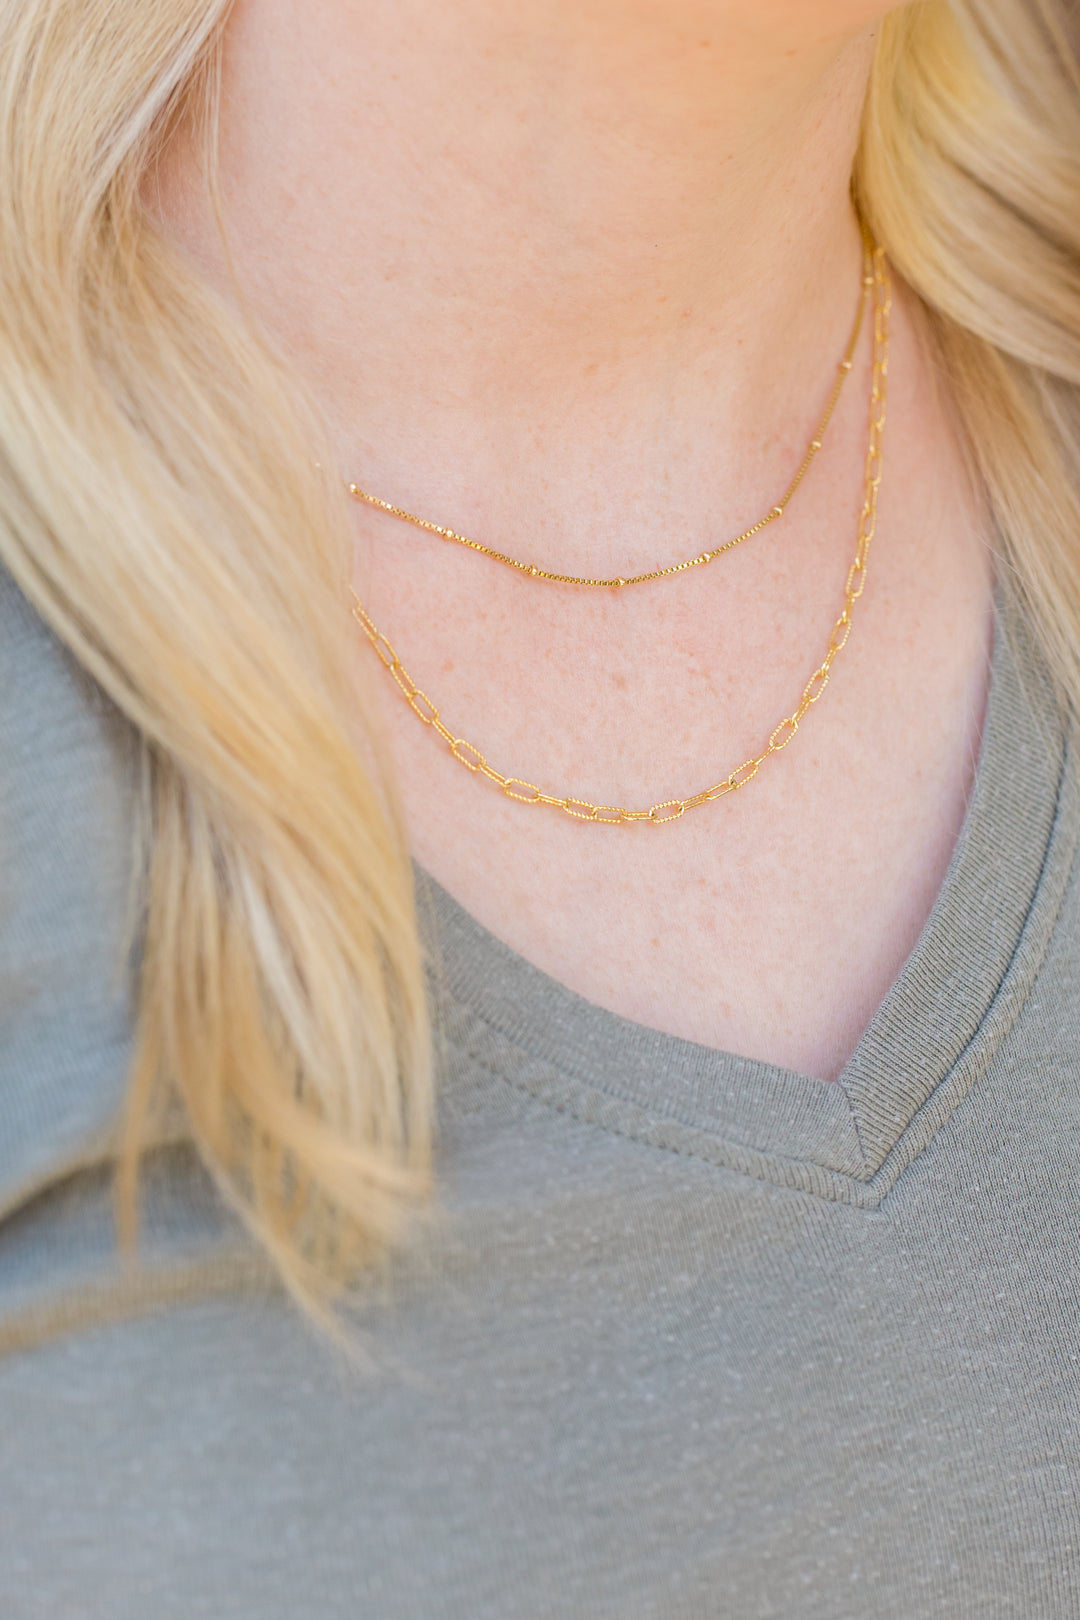 Women's dainty gold filled chain necklace by Anna Shae Jewelry in Lexington, Kentucky 